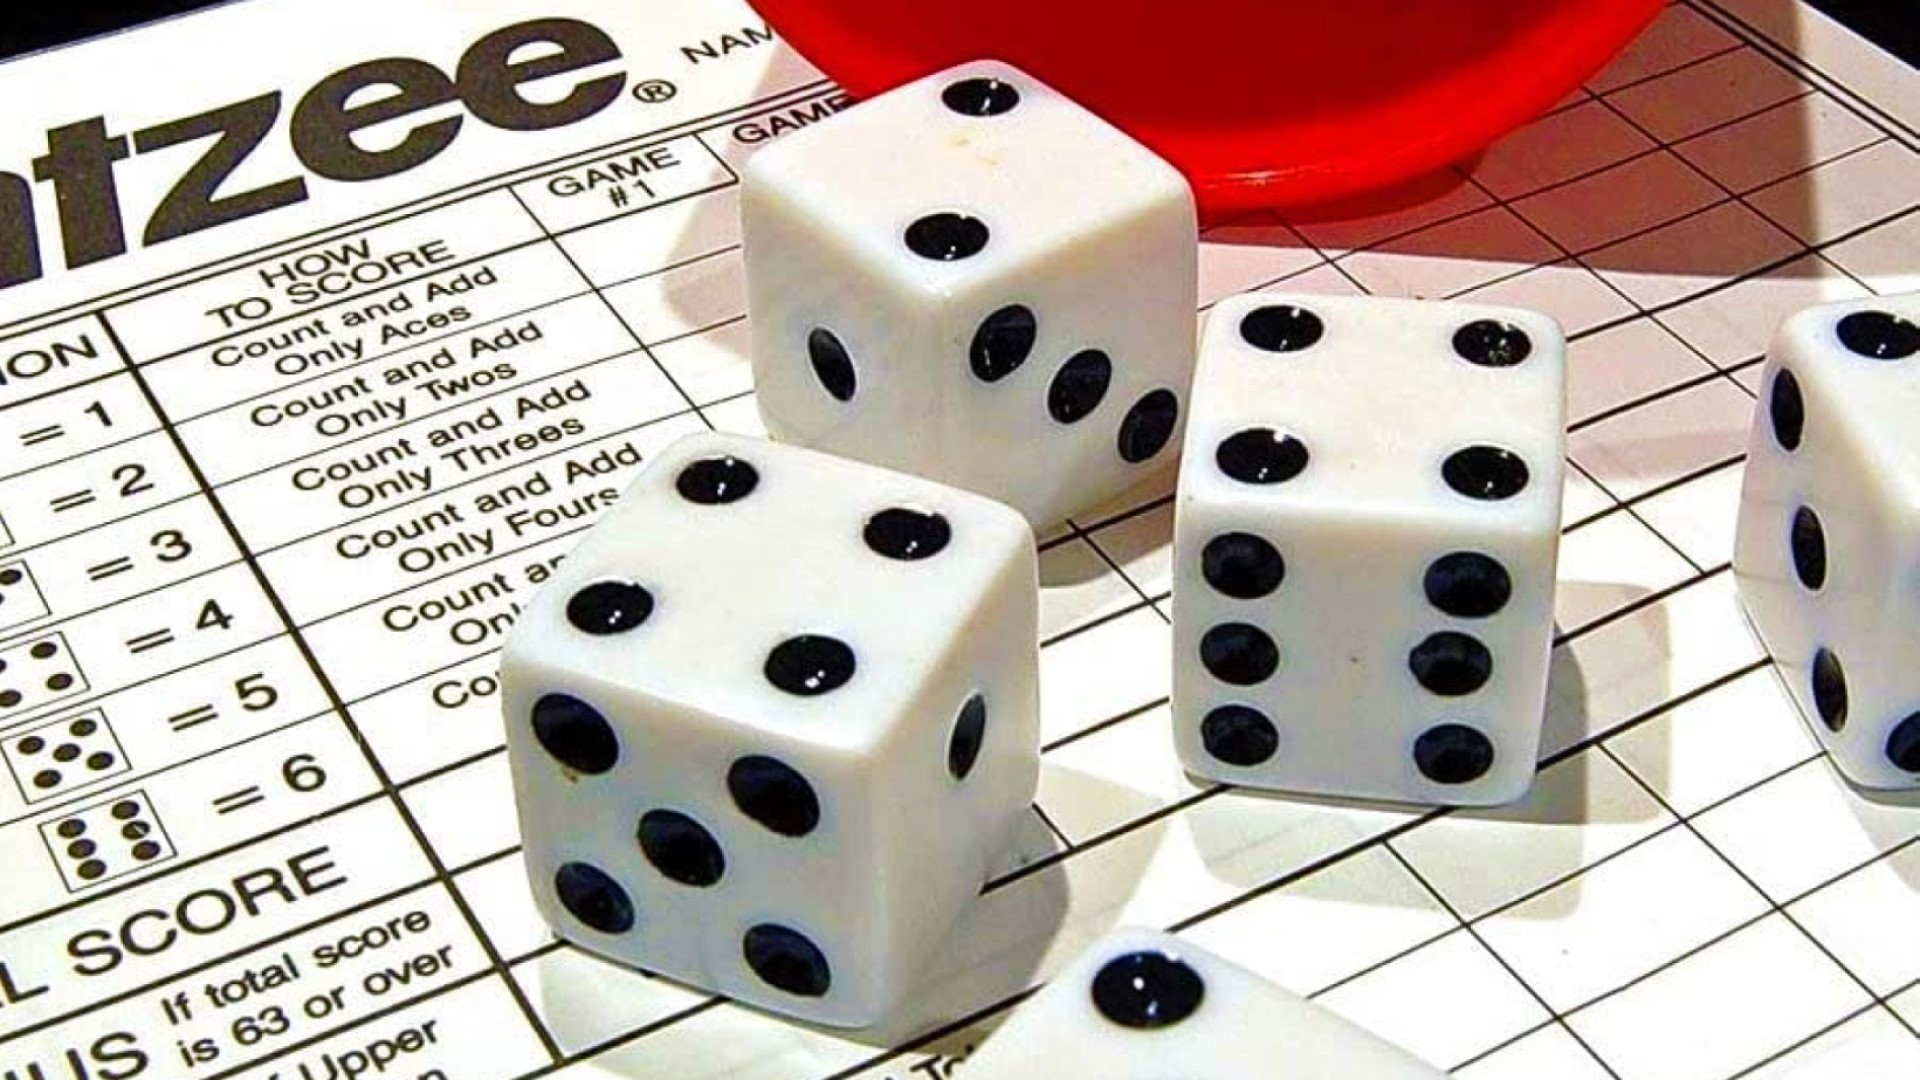 Roll 2 dice and get the product or the sum of the numbers they